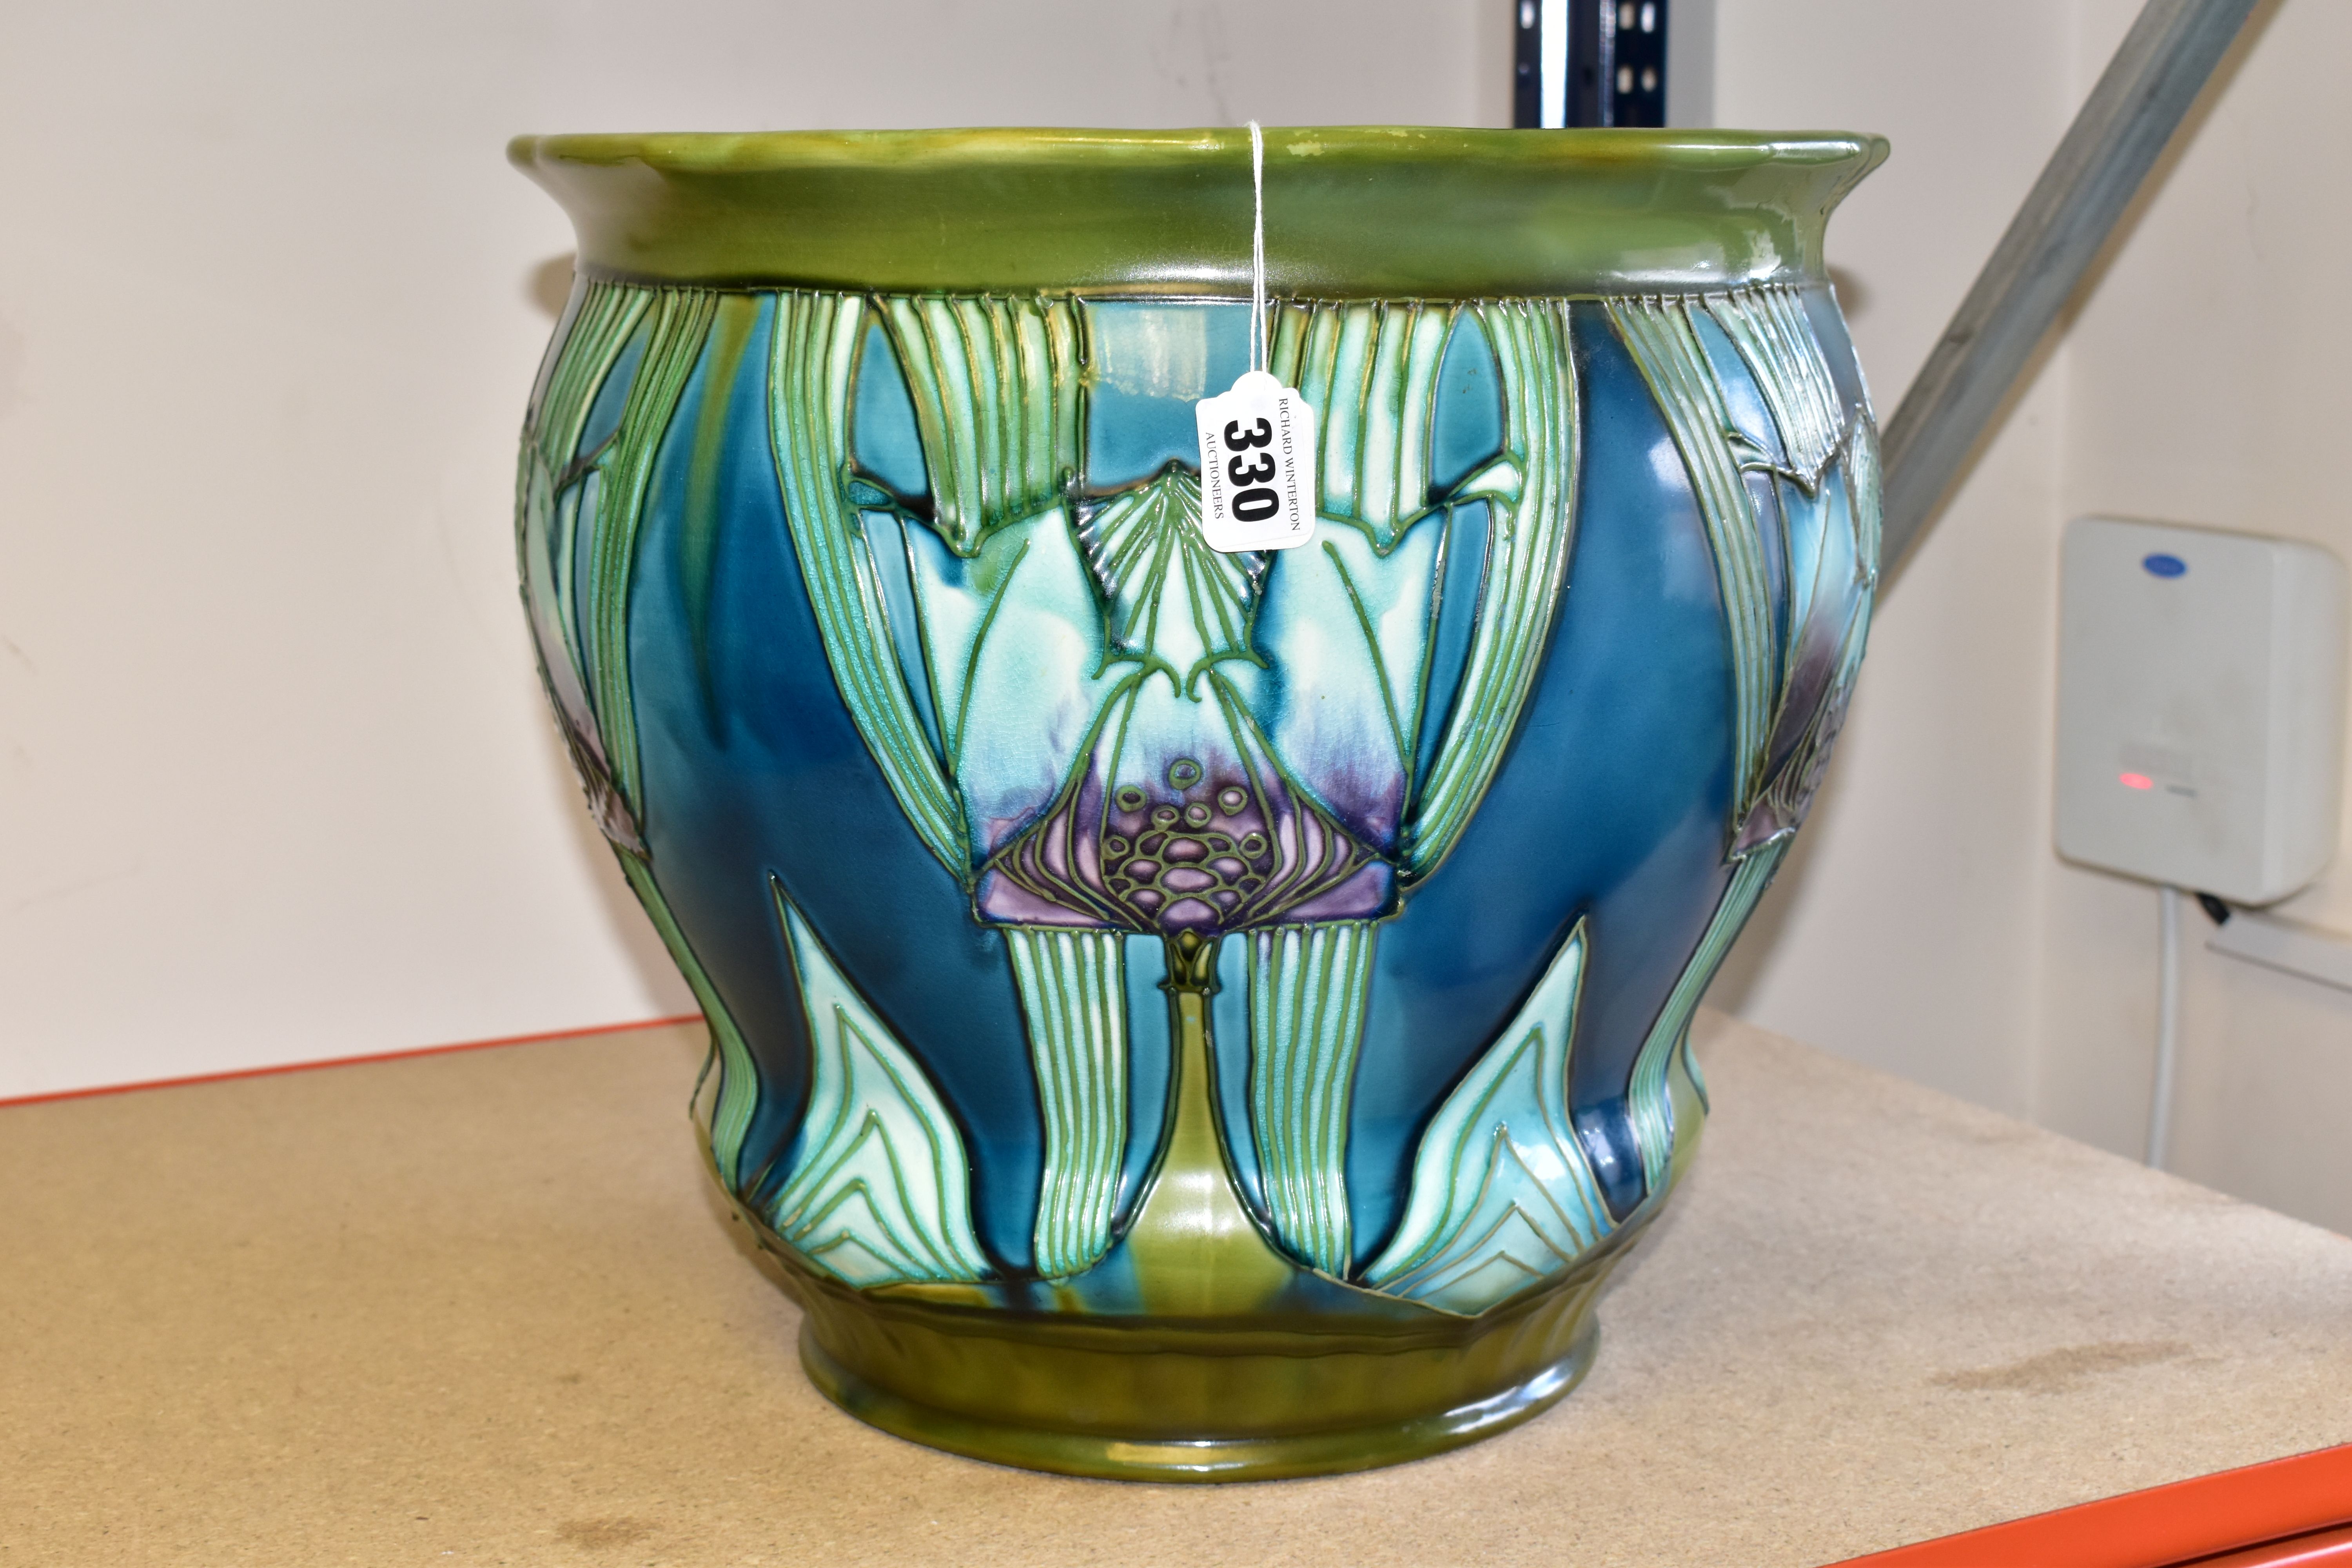 A VERY LARGE MINTON JARDINIERE, with a green, turquoise and lilac coloured Art Nouveau '